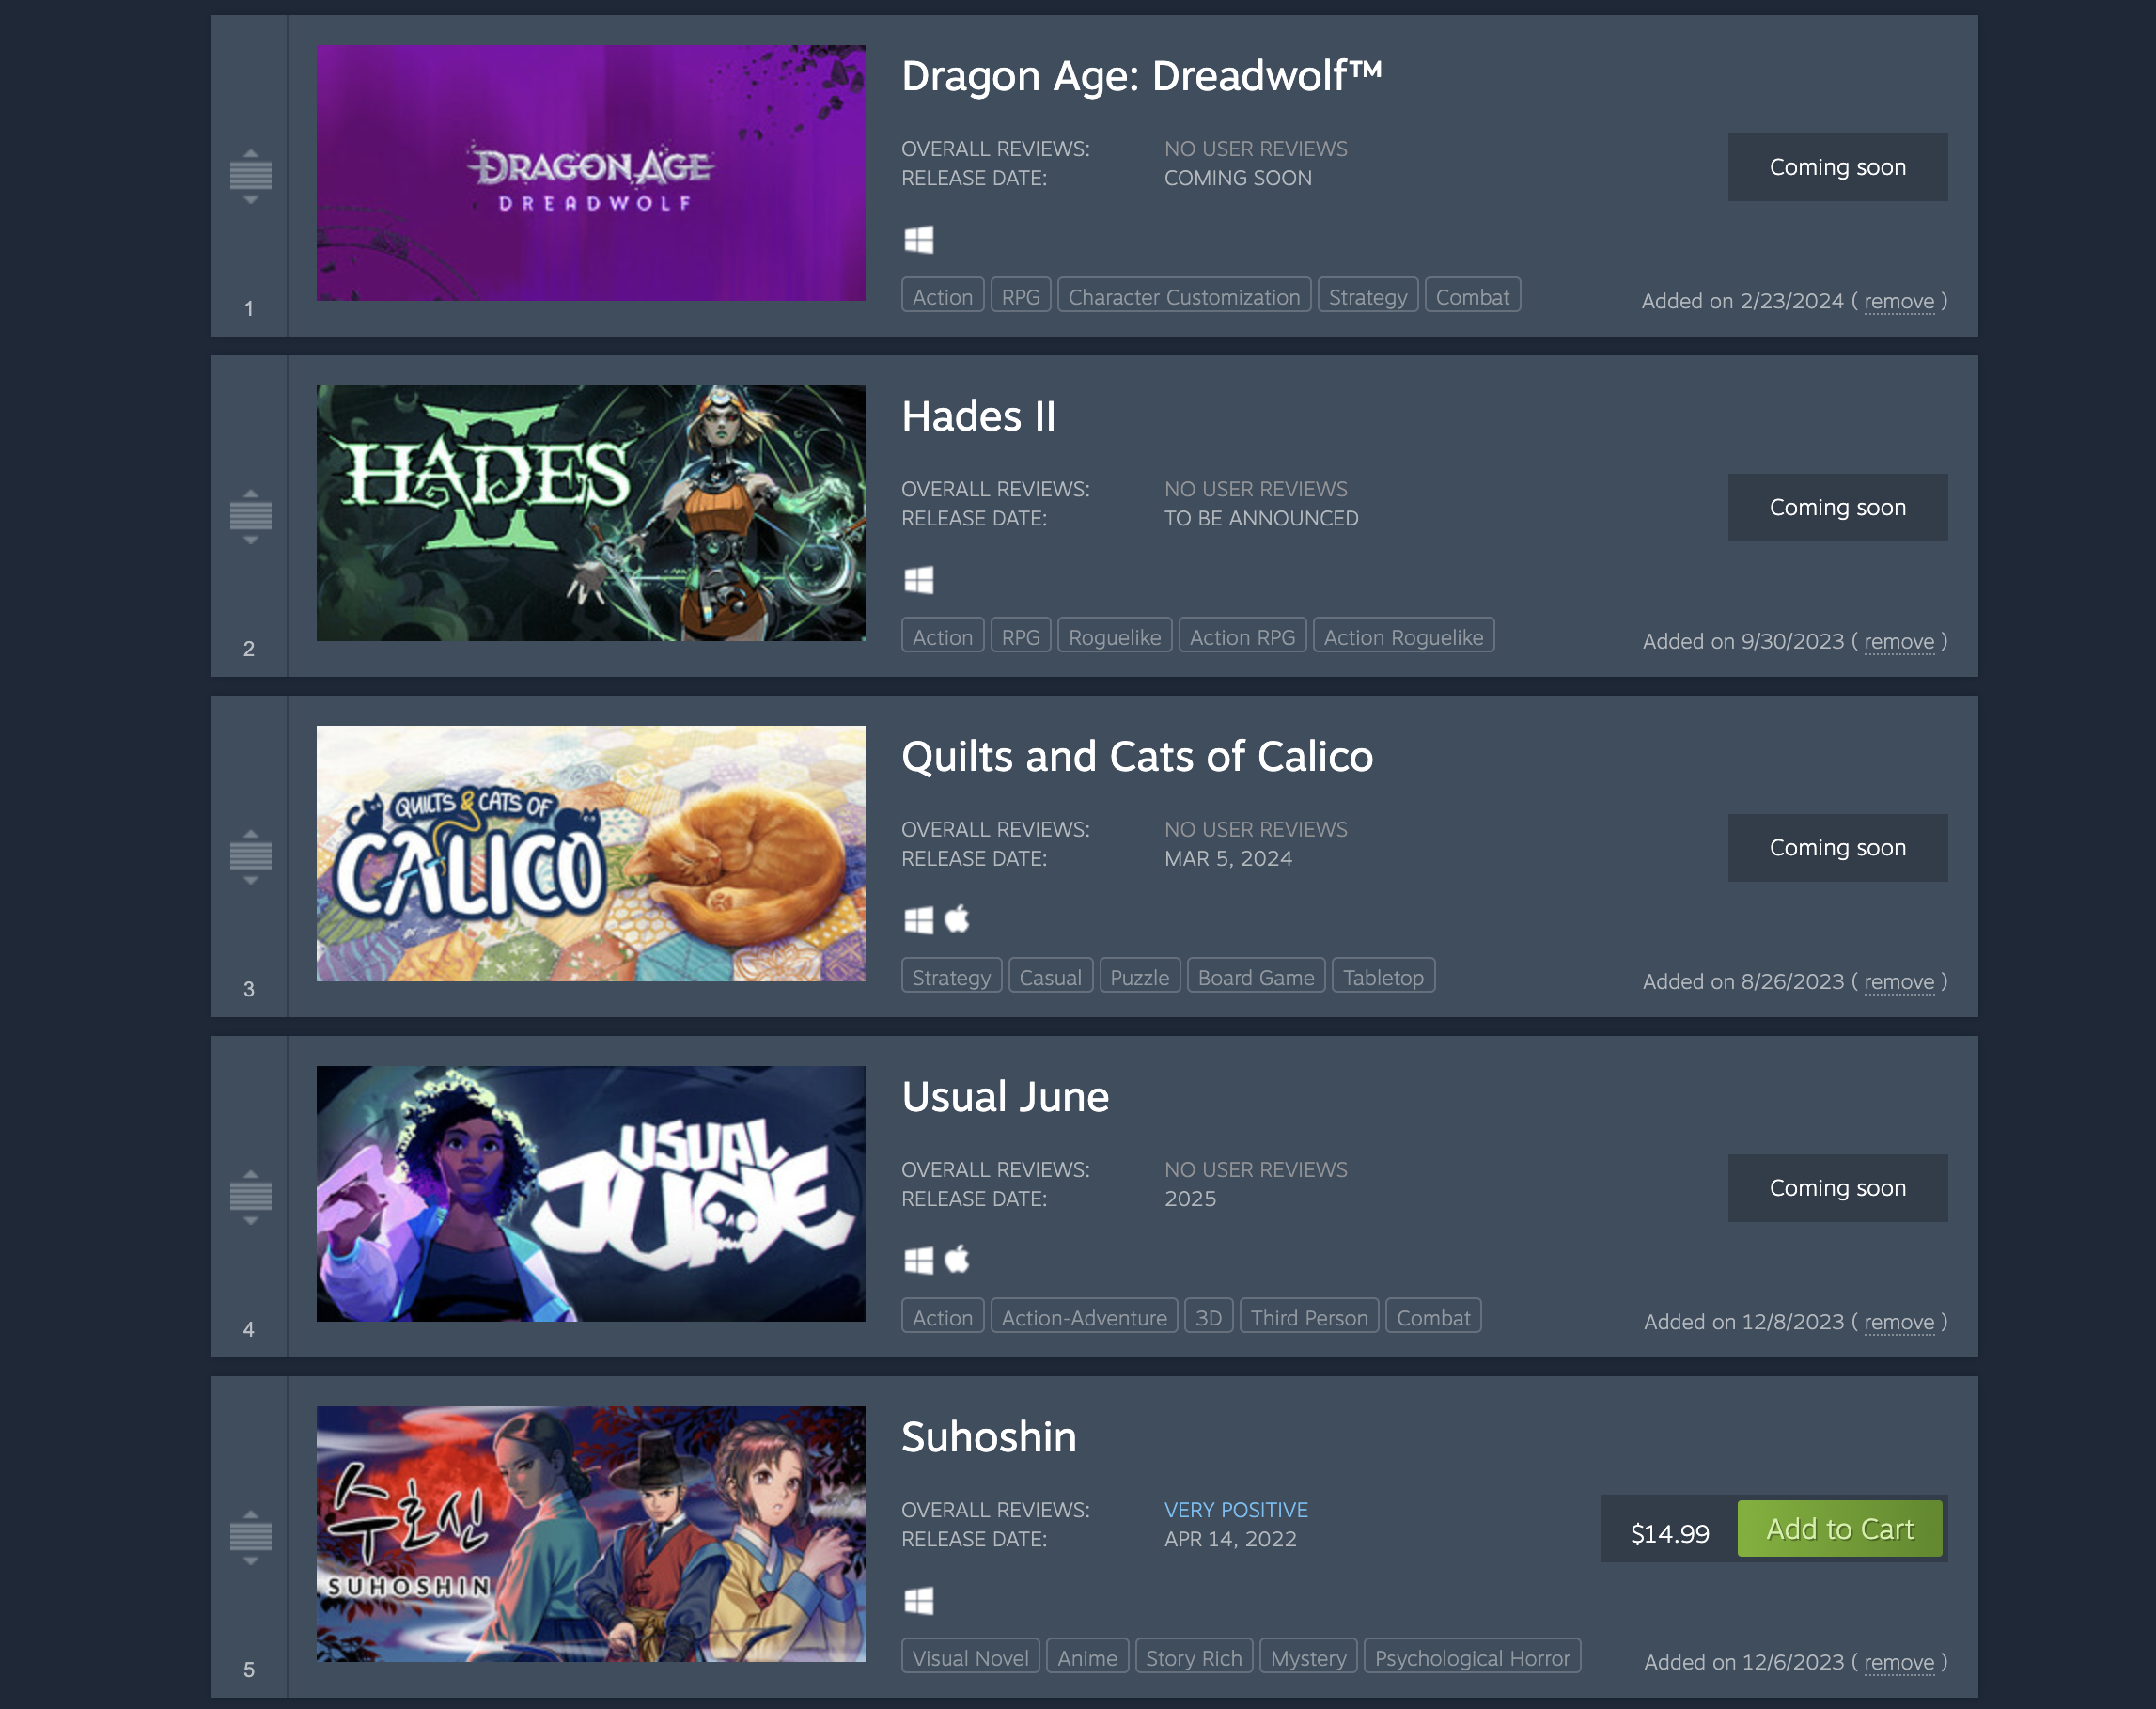 A screengrab of the wishlist page on Steam's website. Five games are listed top to bottom in this order: Dragon Age: Dreadwolf, Hades II, Quilts and Cats of Calico, Usual June, and Suhoshin. Each item has an icon to the left of the image, as well as a number.